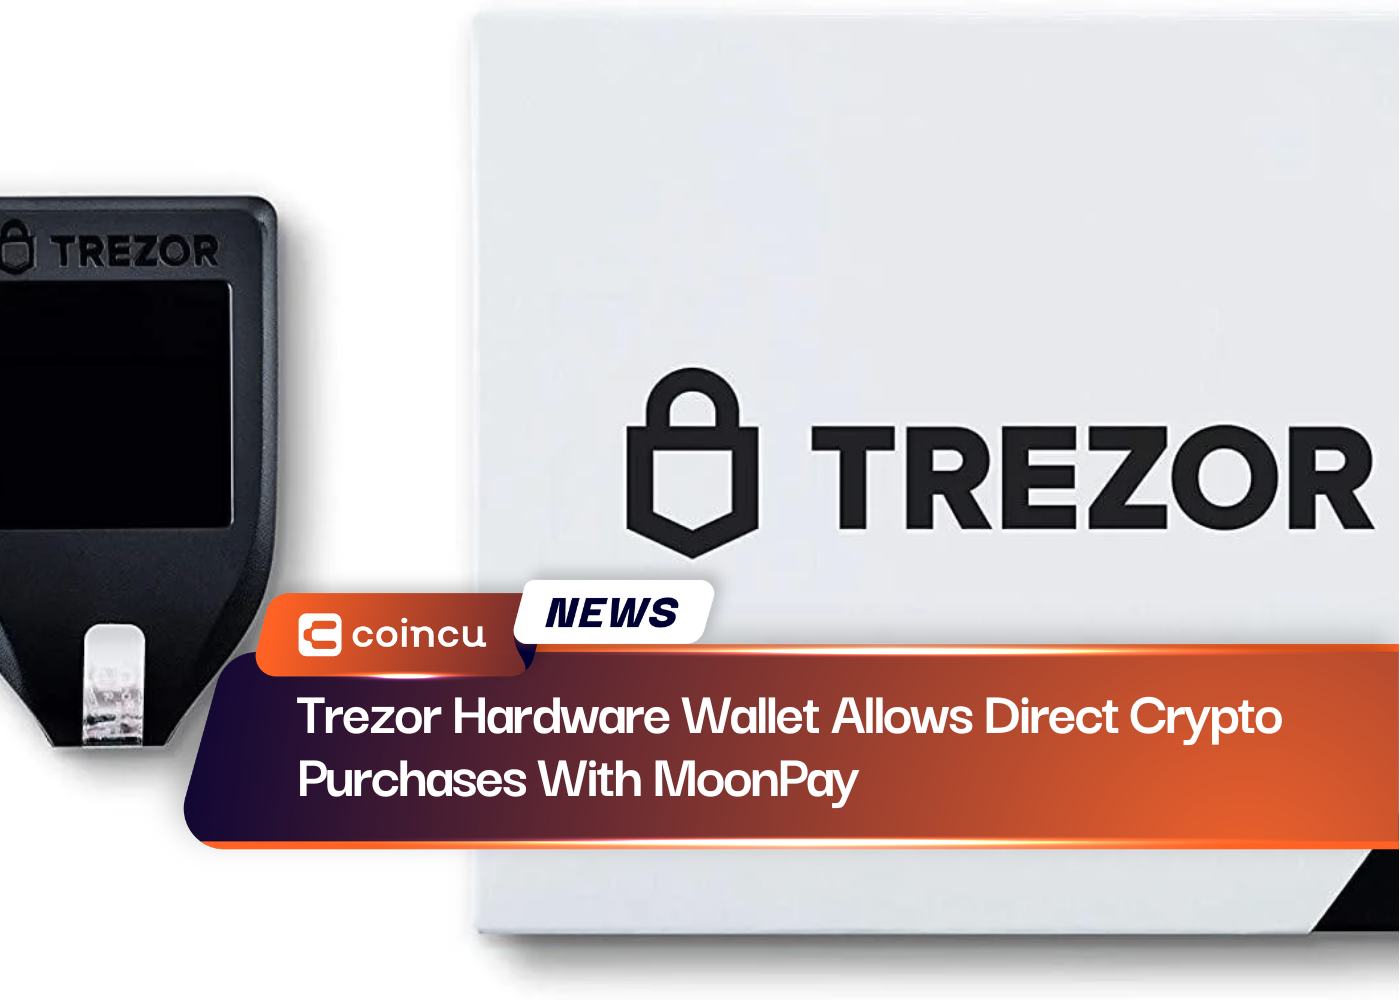 Trezor Hardware Wallet Allows Direct Crypto Purchases With MoonPay